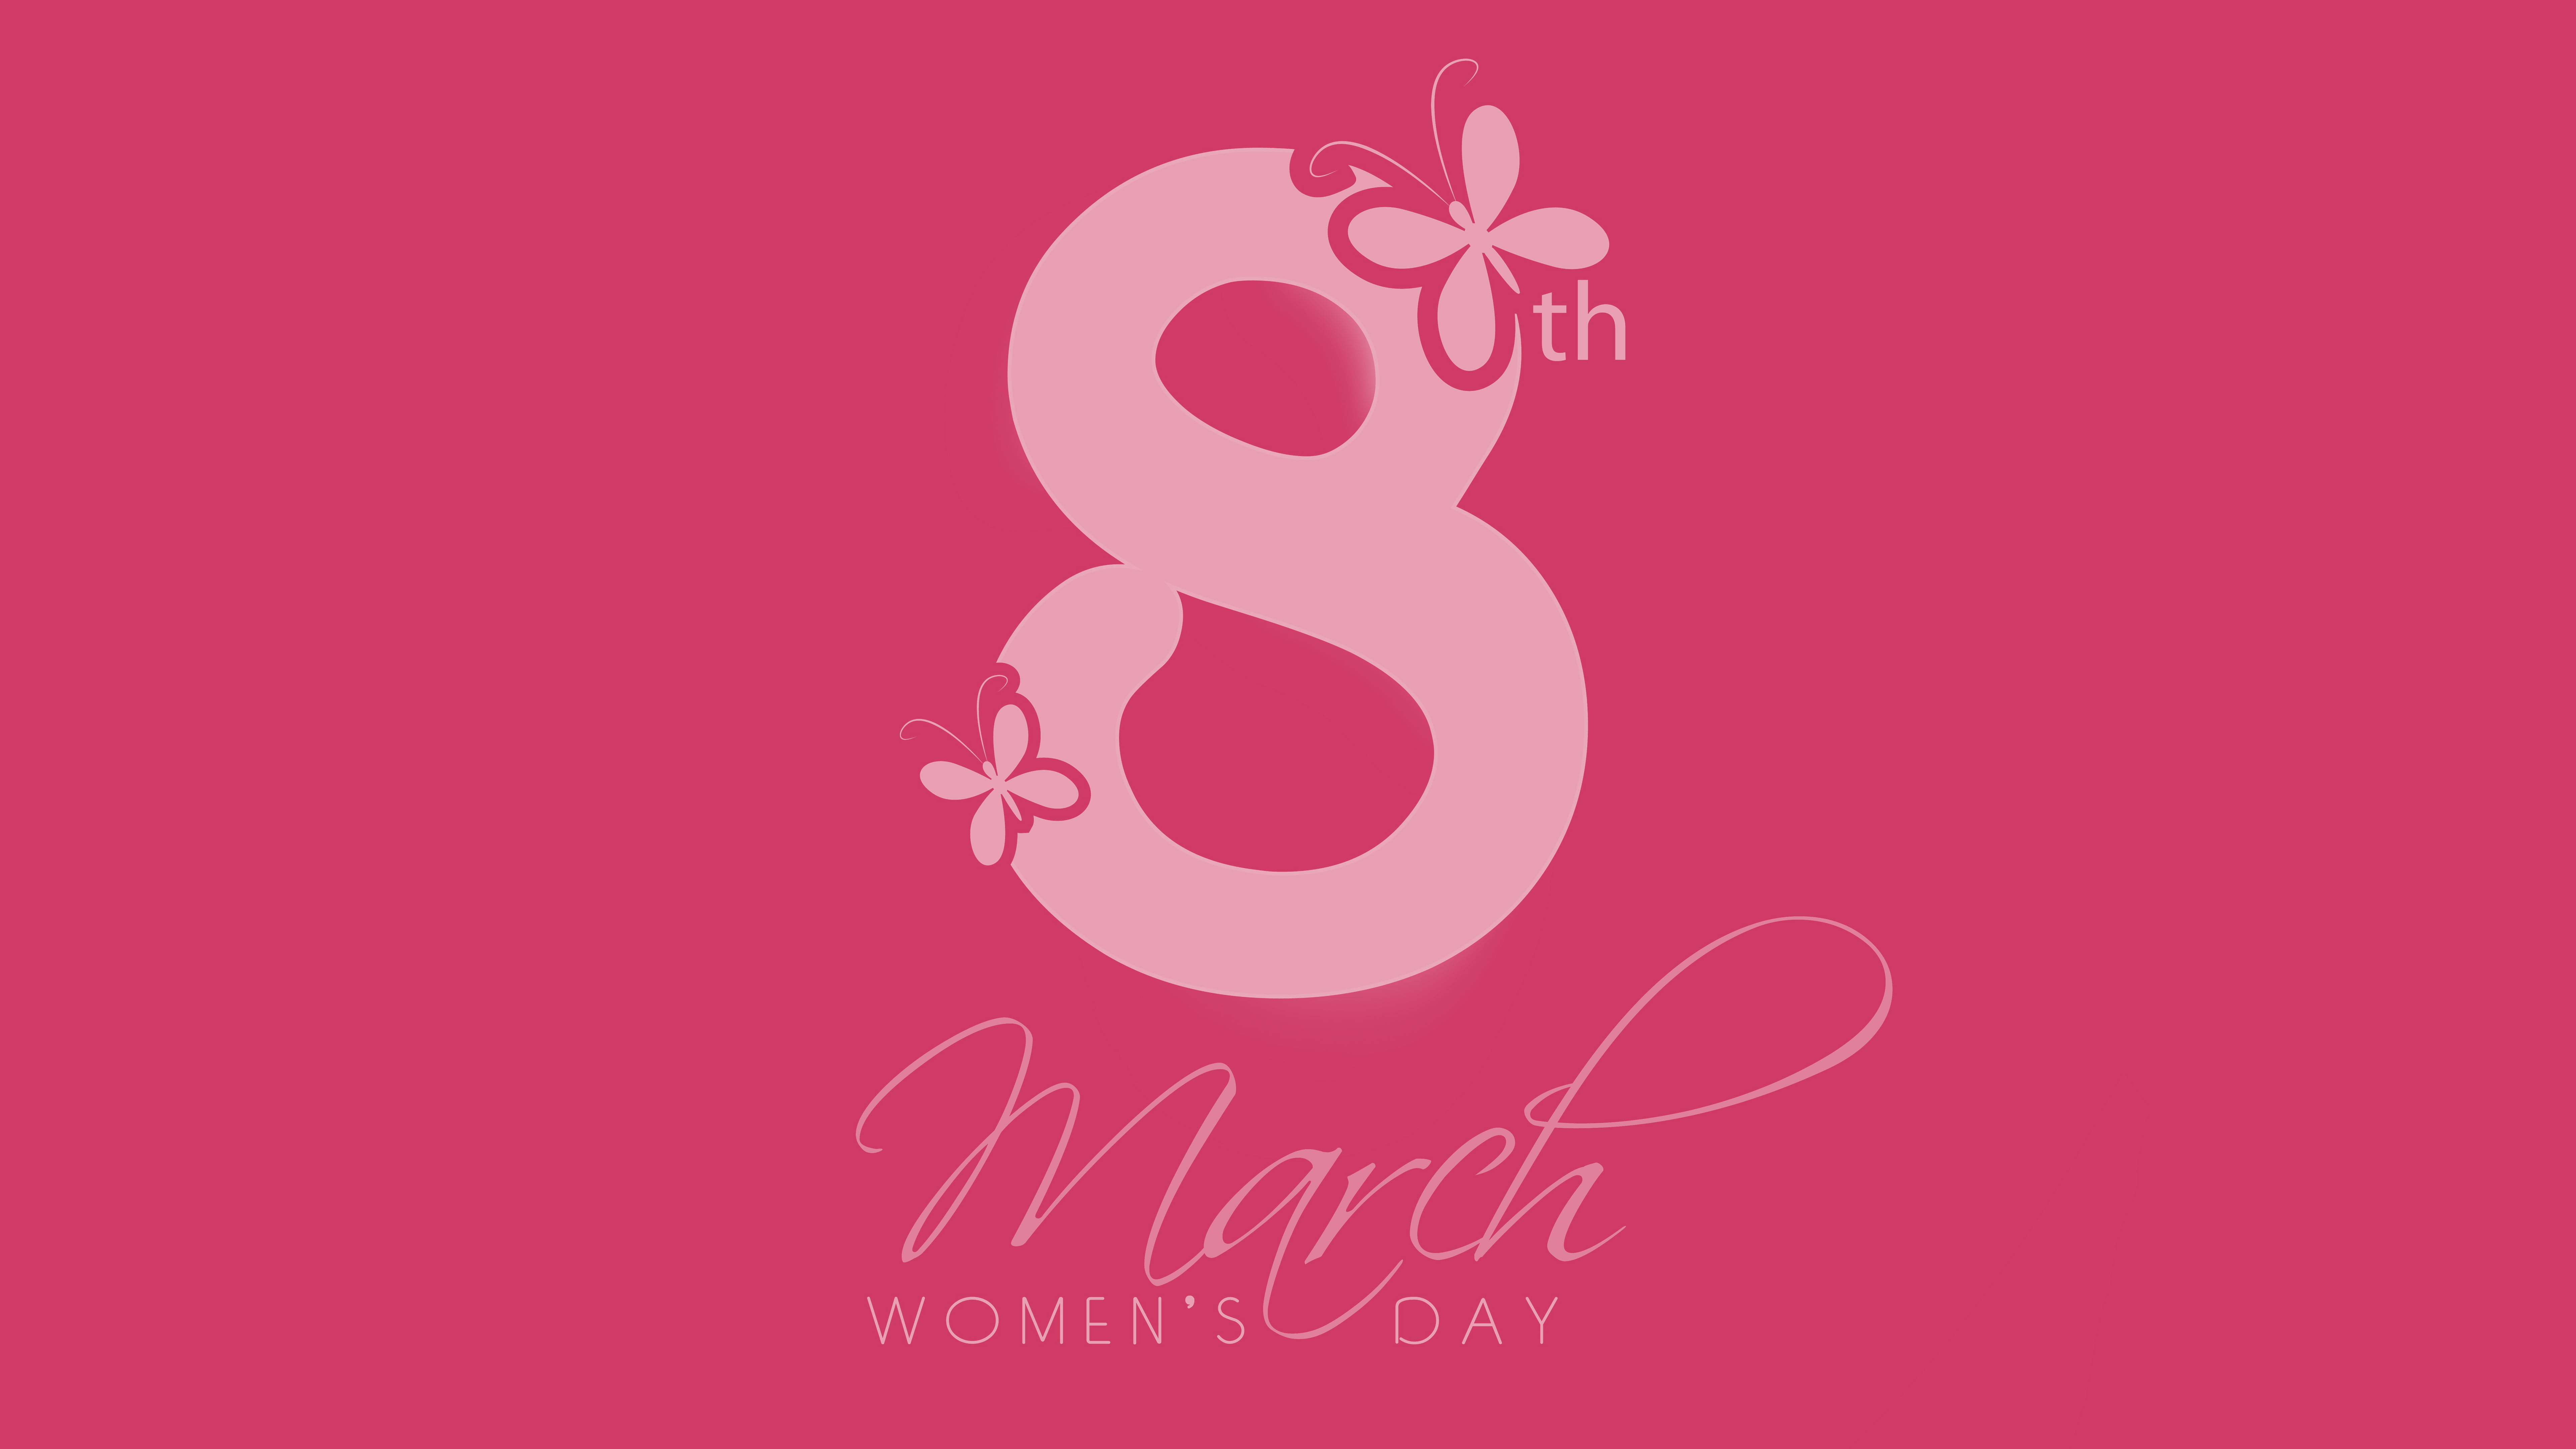 8th March women's day illustration HD wallpaper